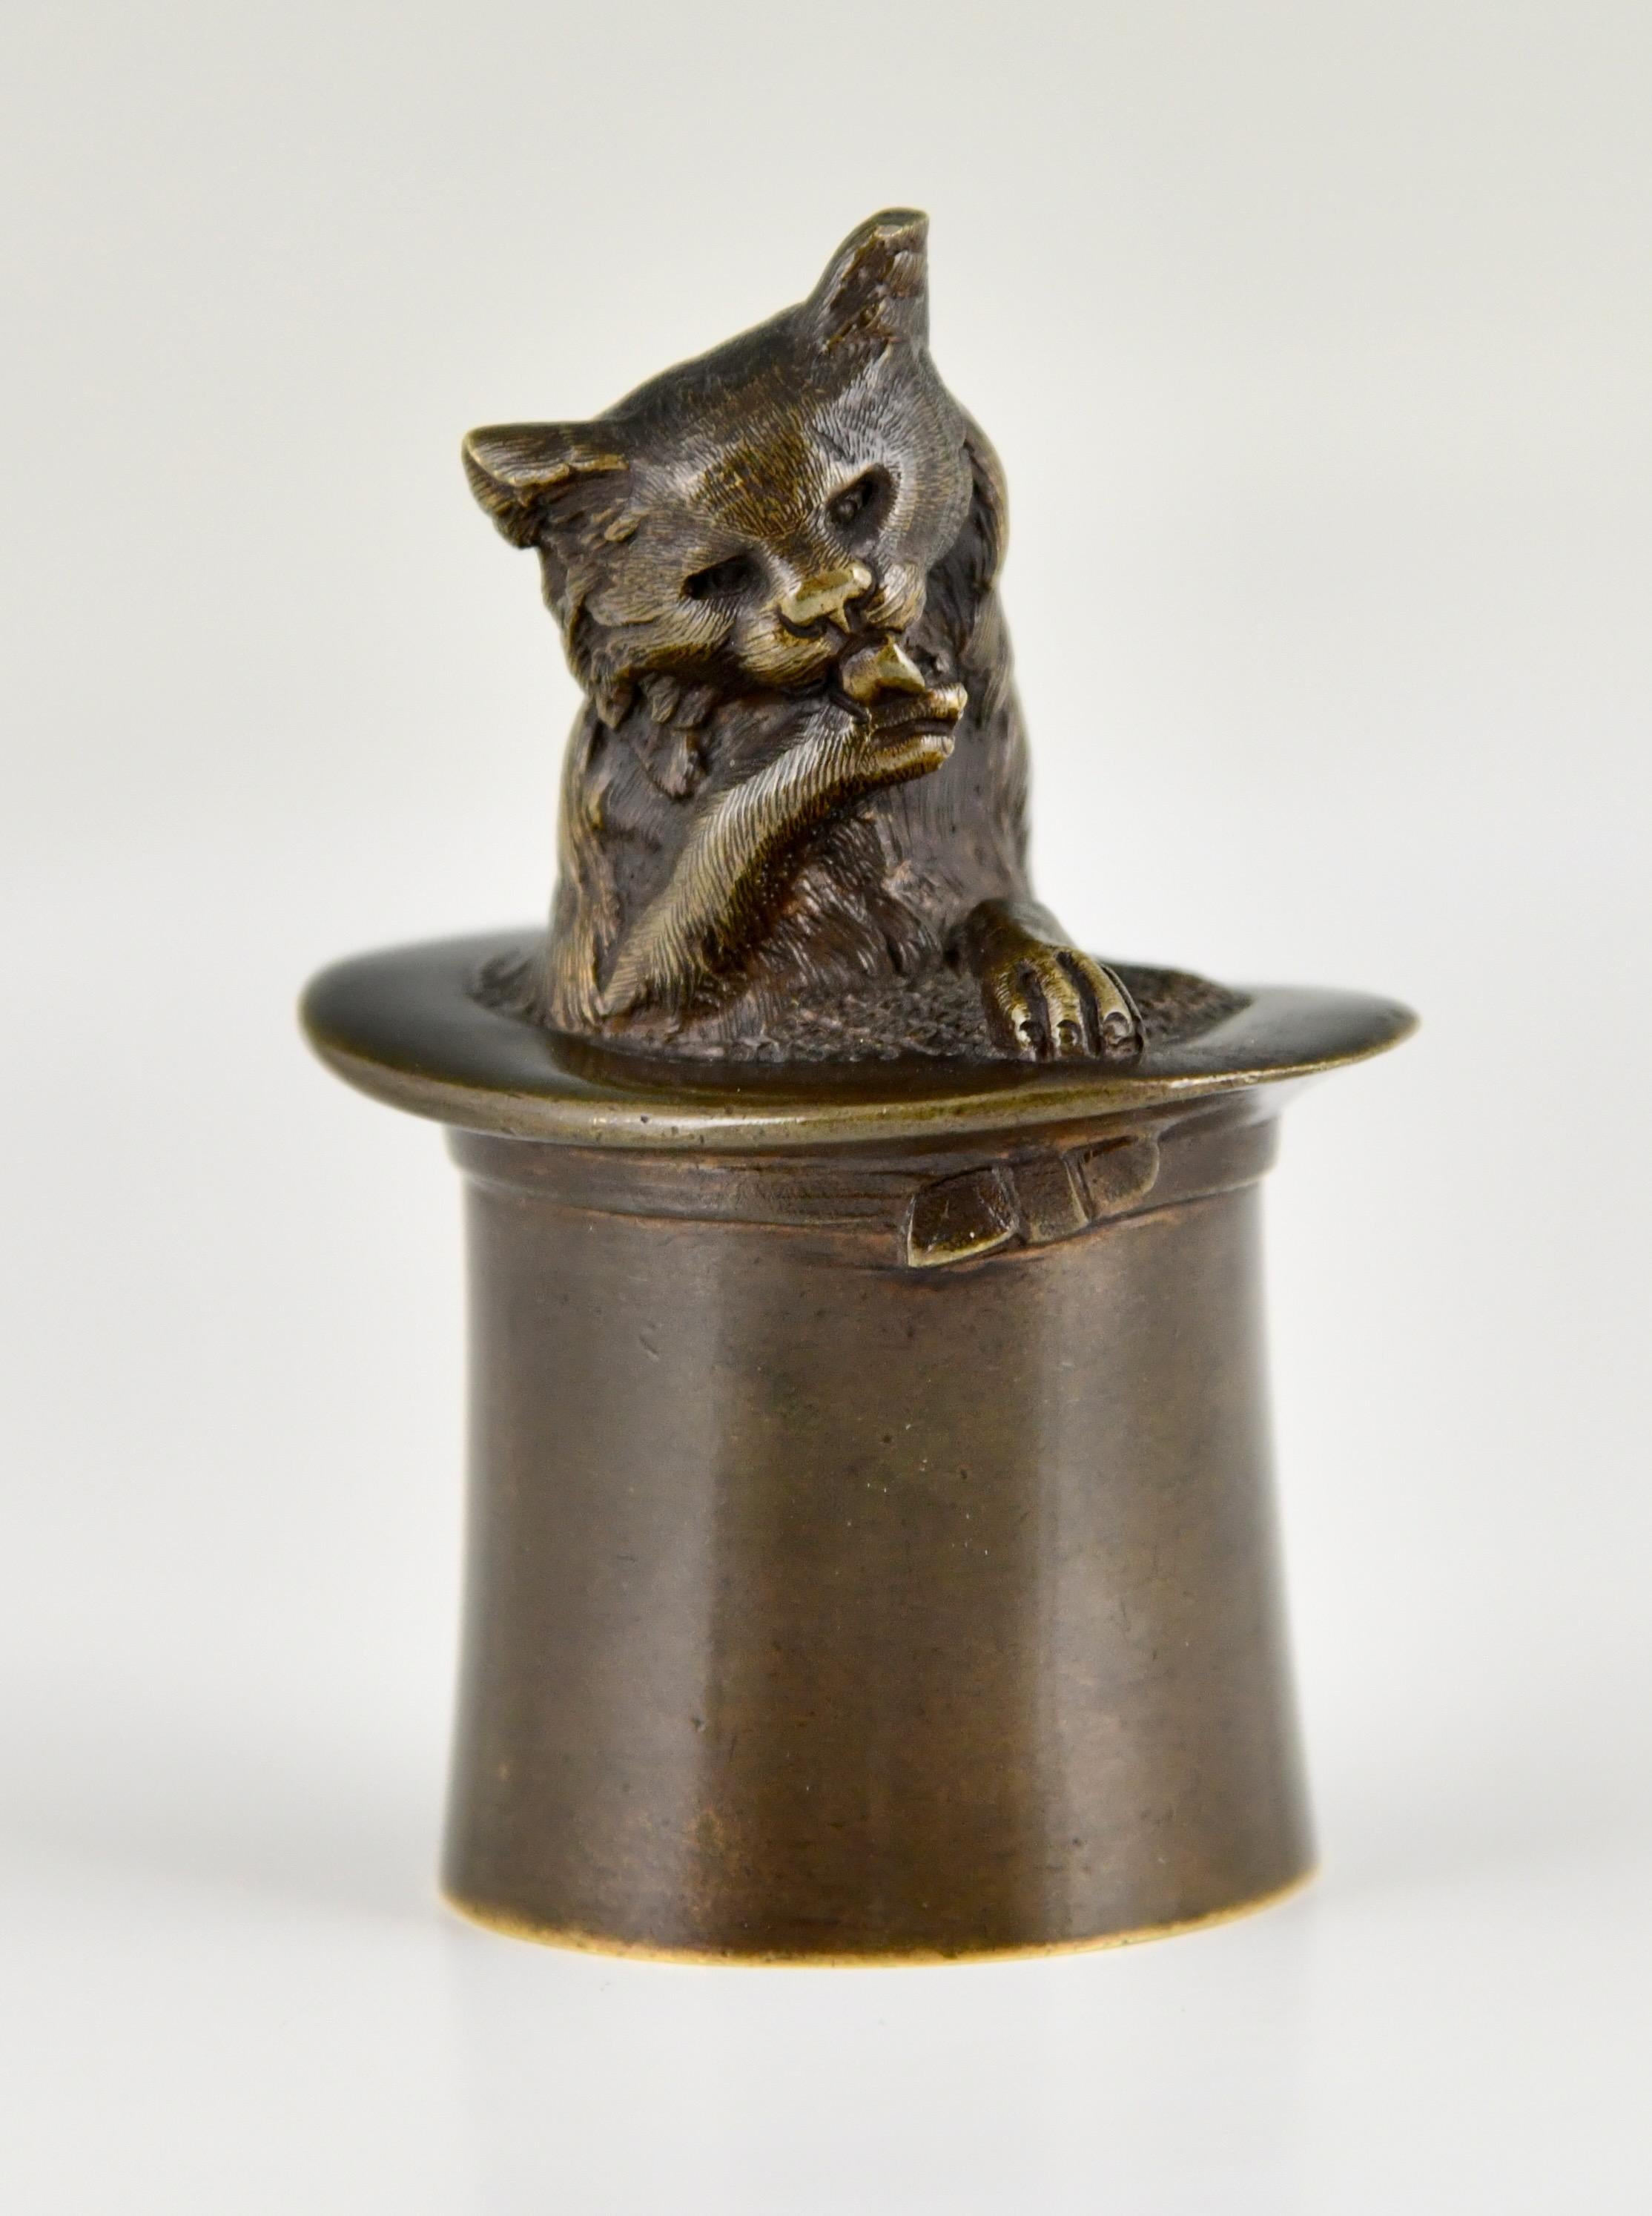 Antique bronze table bell cat in a top hat.
France 1880-1900